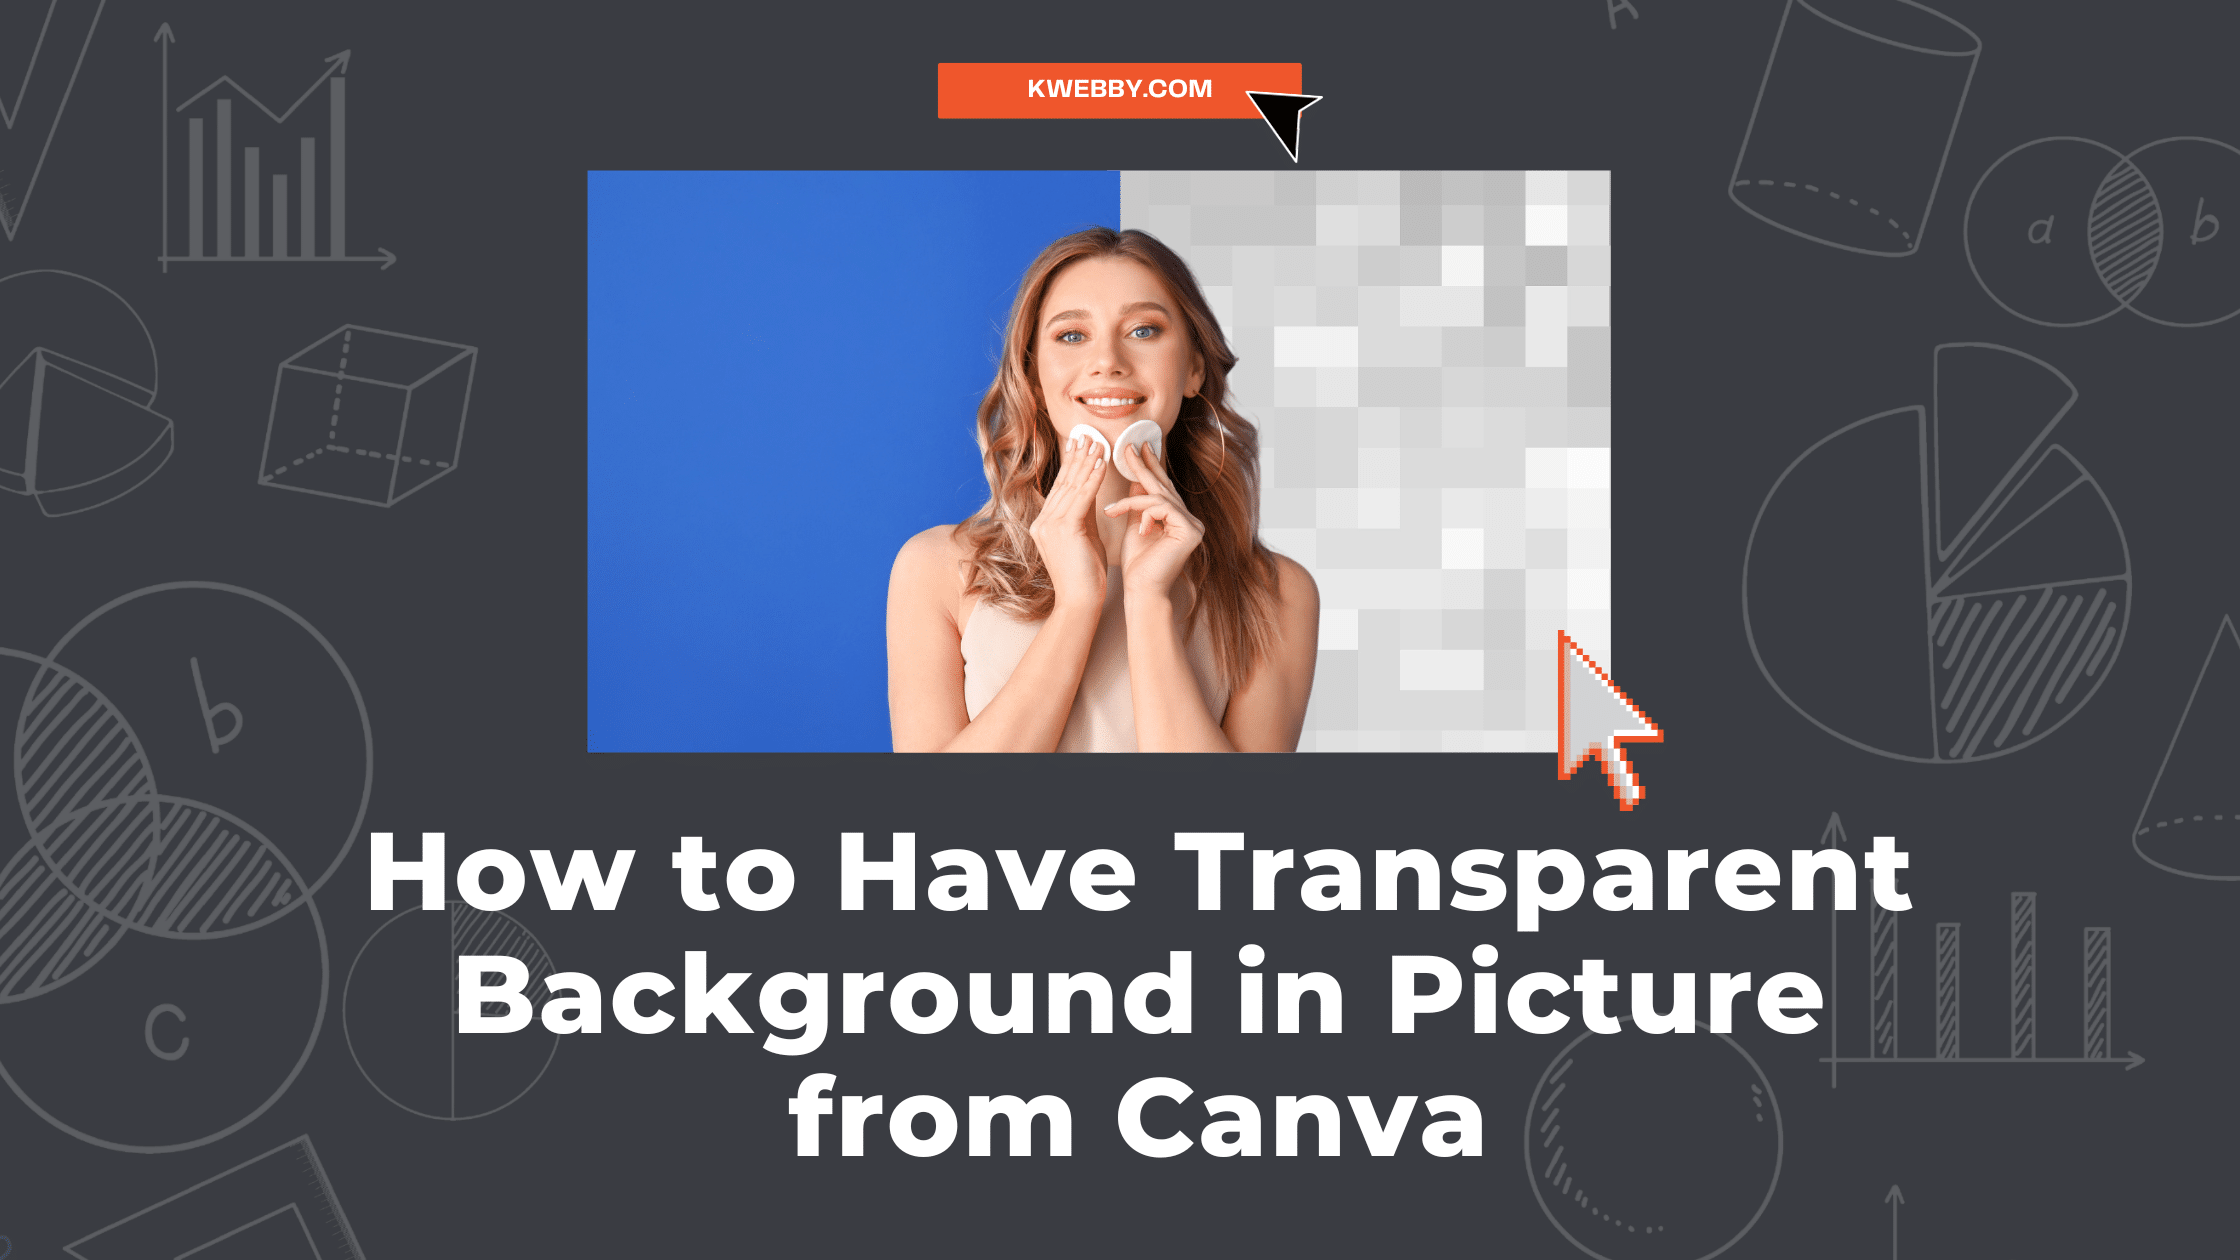 How to Have Transparent Background in Picture from Canva